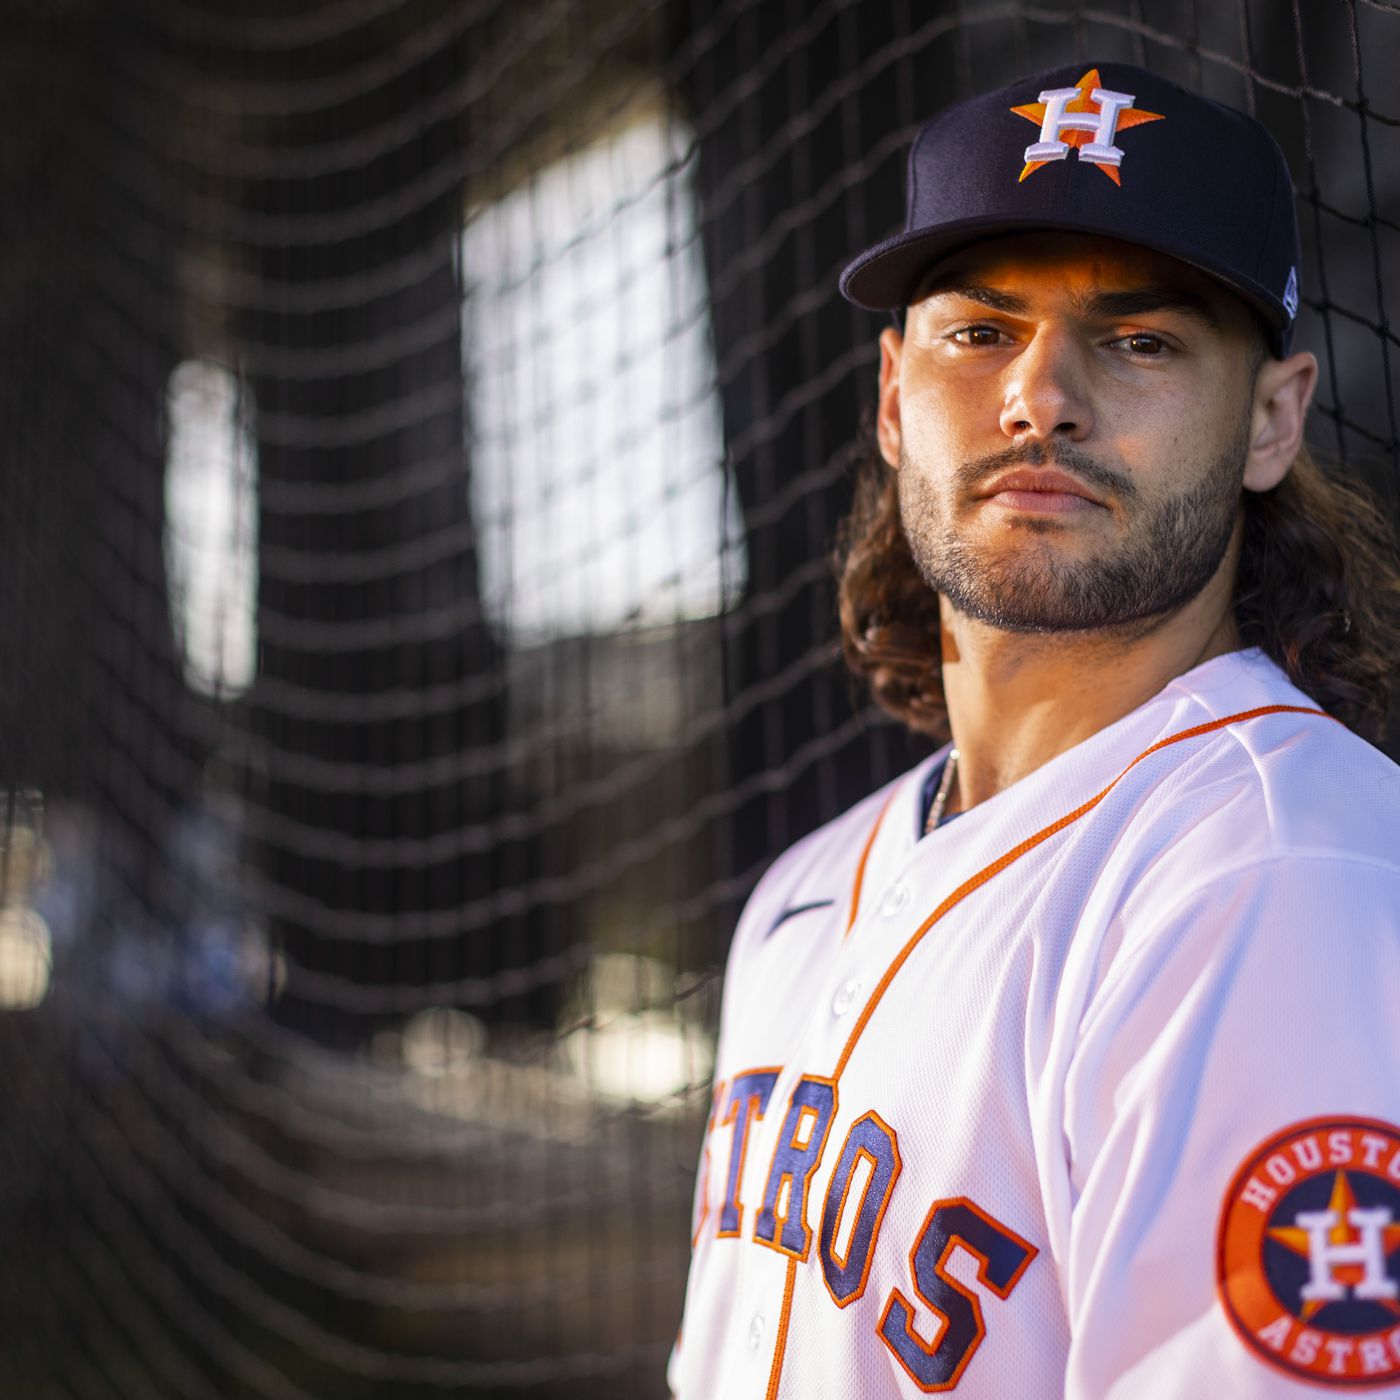 Lance McCullers Jr. injury update: When will Astros SP return to the  rotation this season? - DraftKings Network